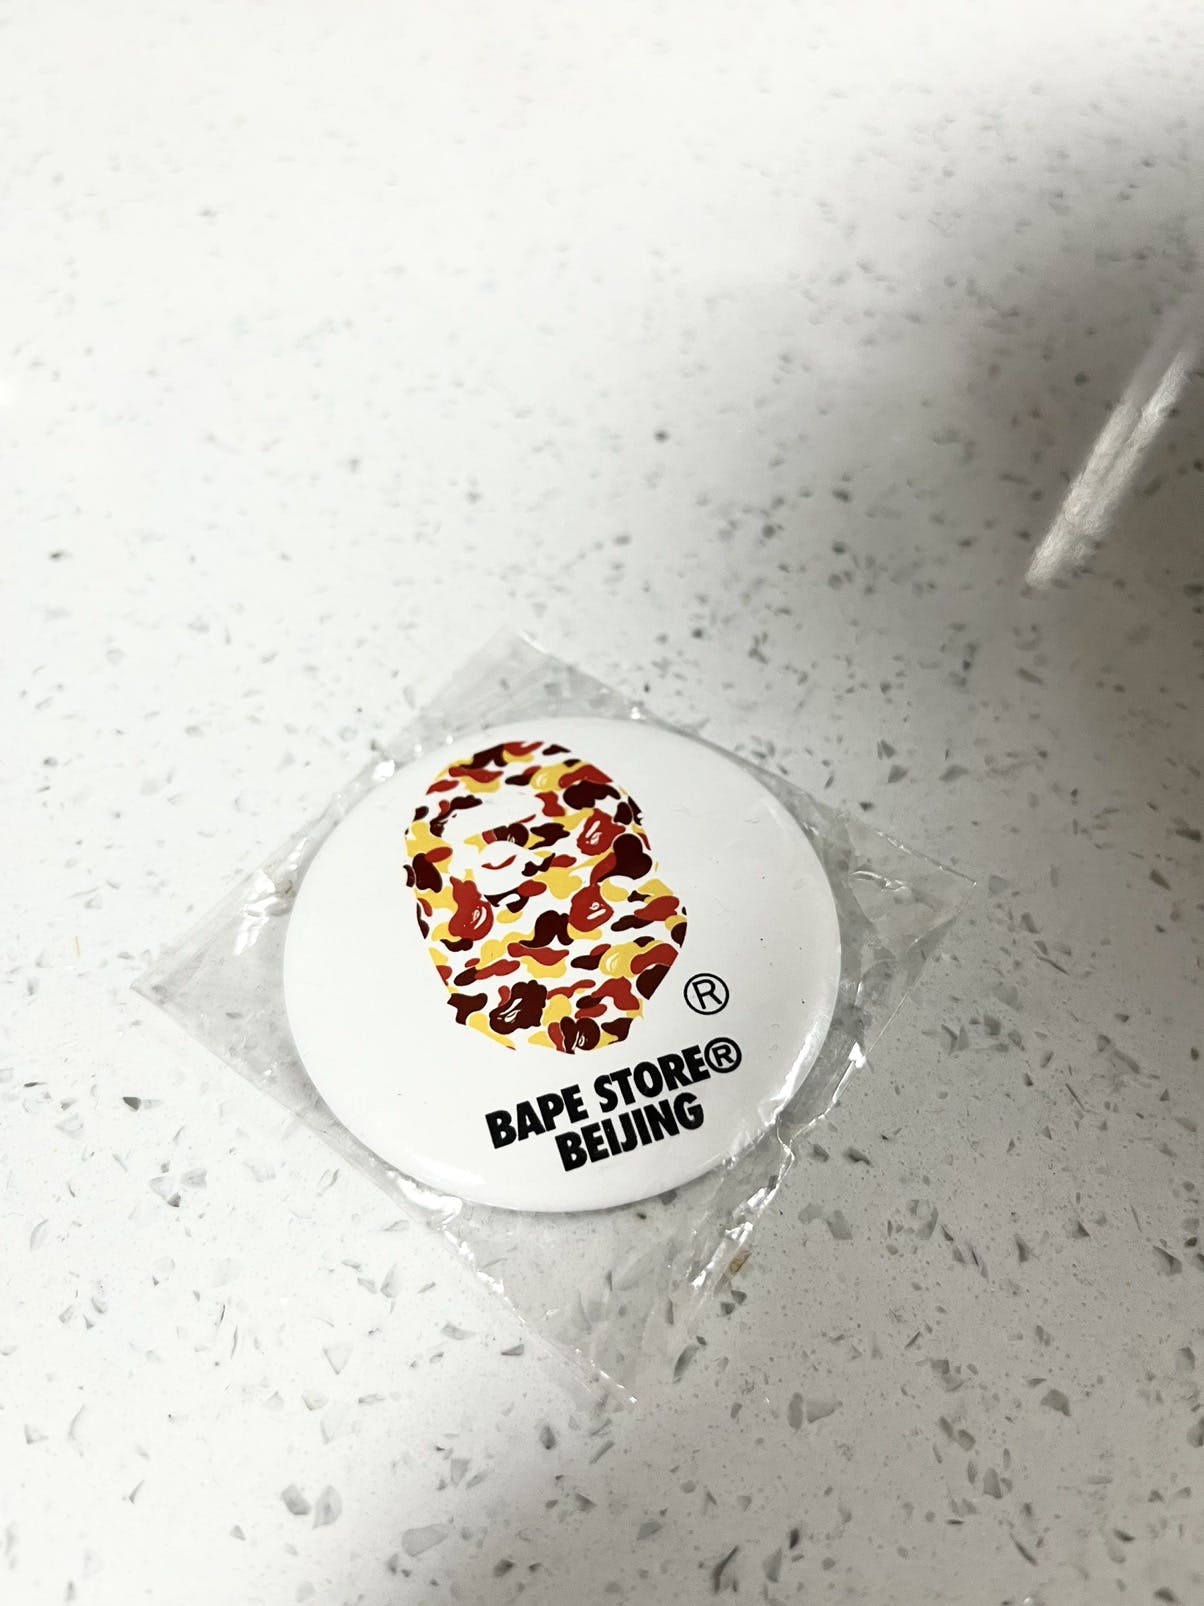 Bape Beijing Store Limited Edition Pins From 2010 - 3